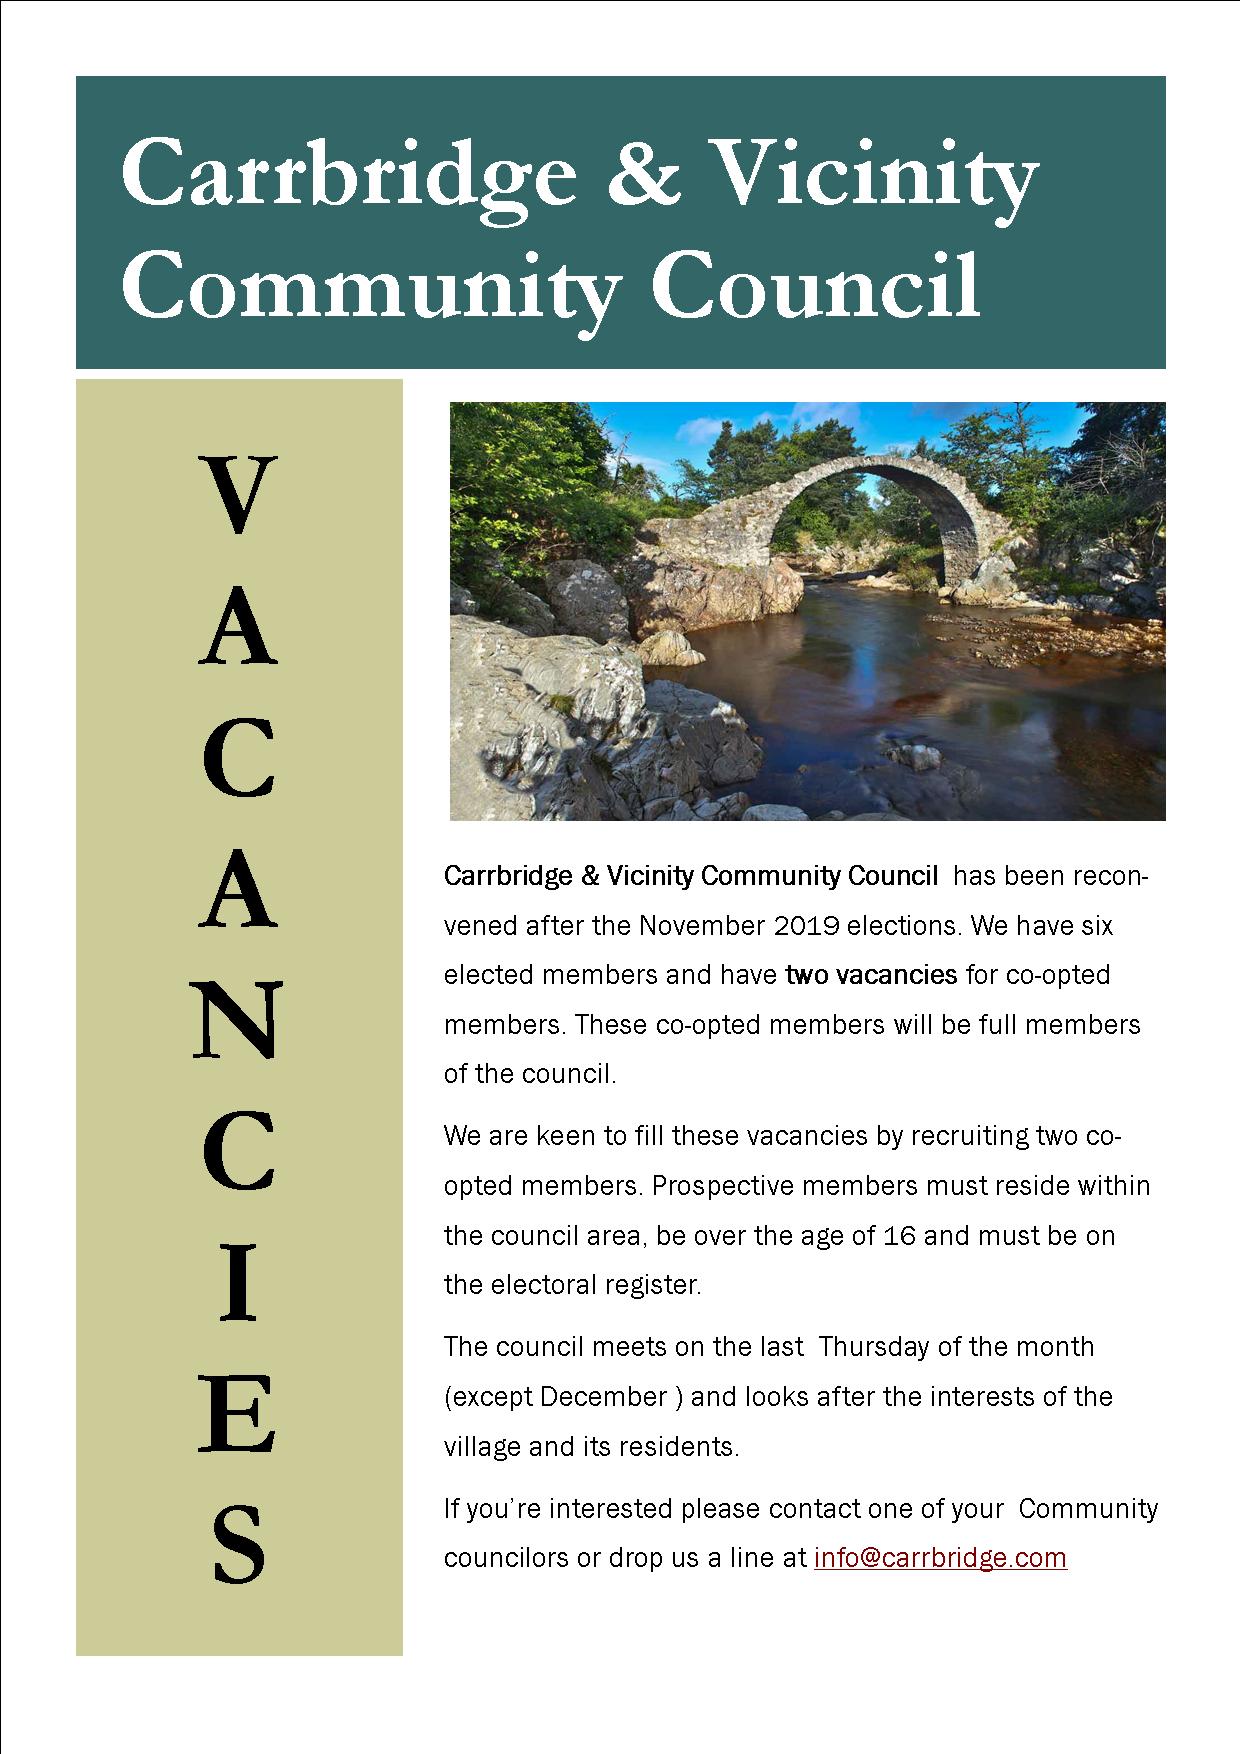 Carrbridge & Vicinity Community Council has been re-convened after the November 2019 elections. We have size elected members and have two vacancies for co-opted members. These co-opted members will be full members of the council. We are keen to fill these vacancies by recruiting two co-opted members. Prospective members must reside within the council area, be over the age of 16 and must be on the electoral register. The council meets on the last Thursday of the month (except December) and looks after the interests of the village and its residents. If you're interested please contact one of your Community Councillors or drop us a line at info@carrbridge.com